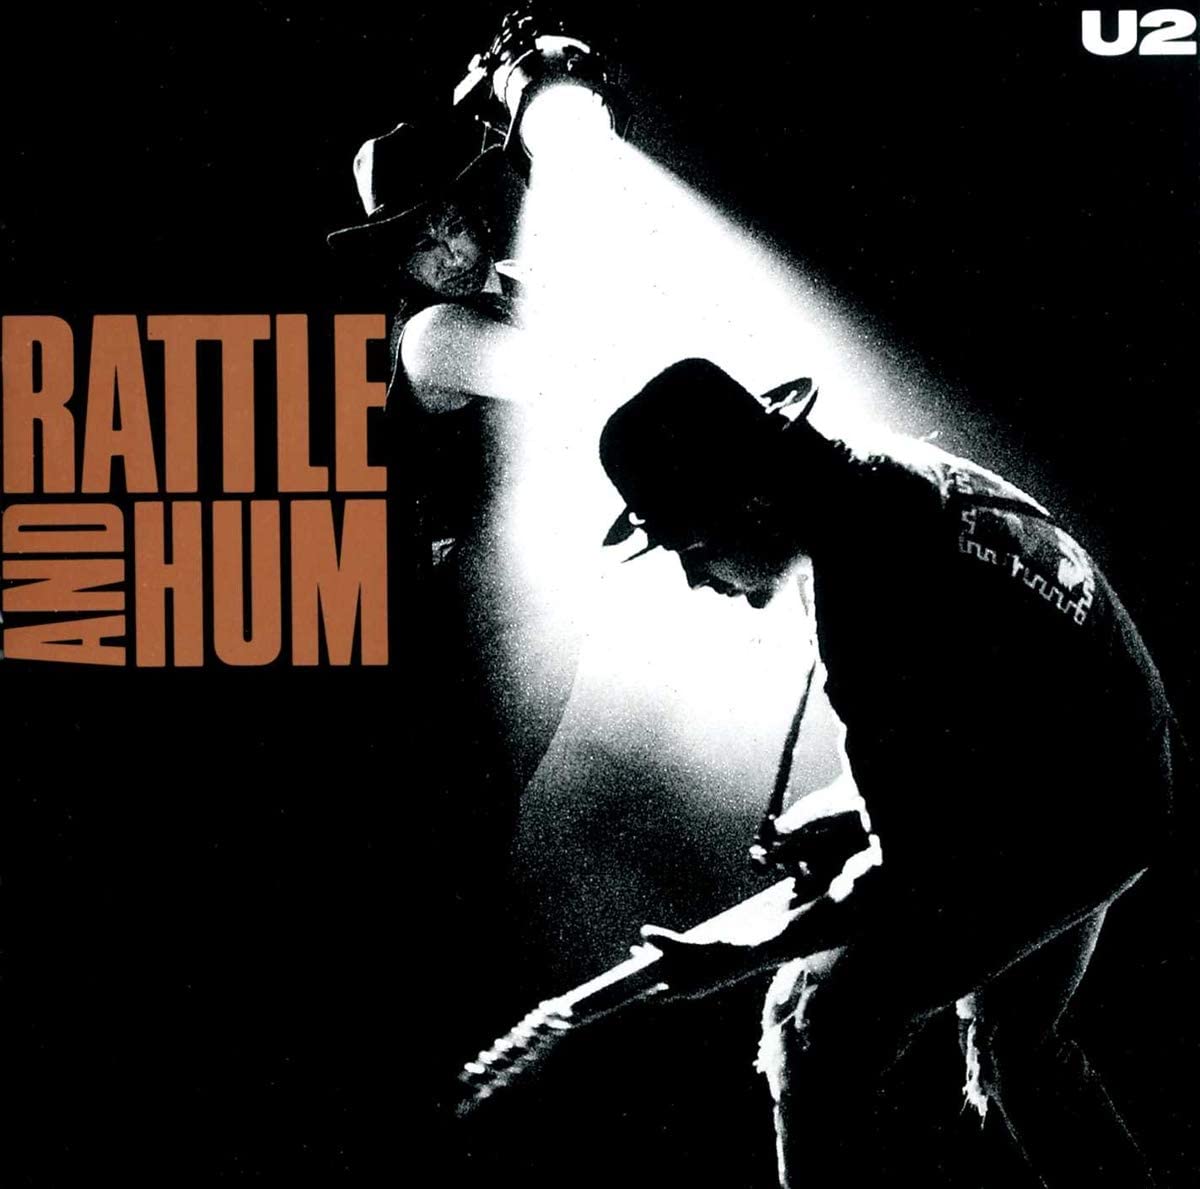 U2 - Rattle And Hum (Used) (Mint Condition) 2 Discs